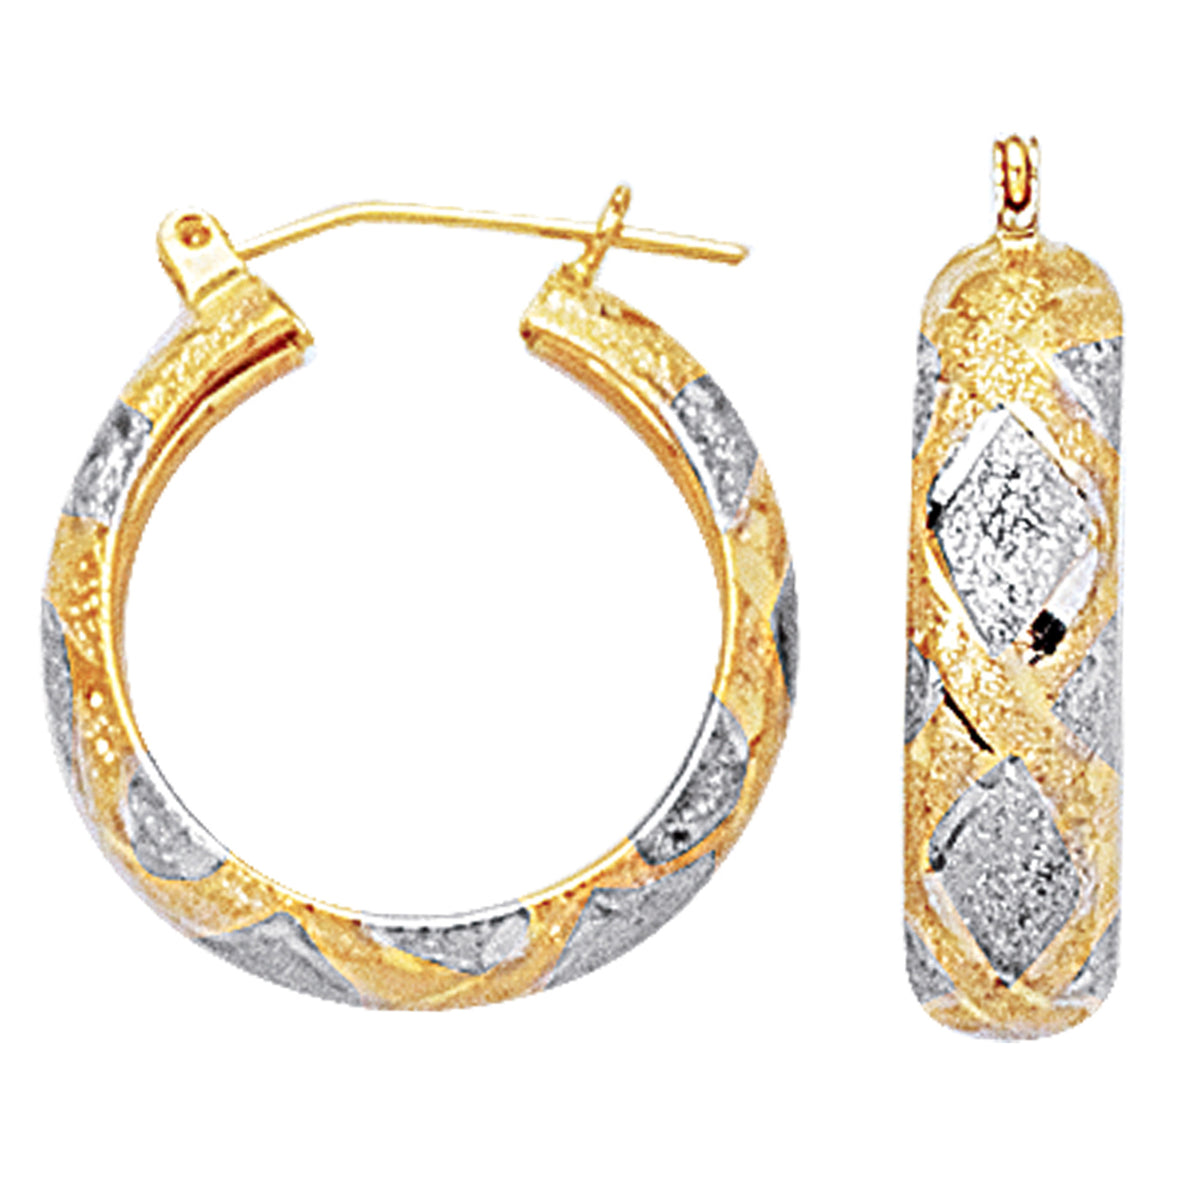 10k 2 Tone White And Yellow Gold Diamond Cut Textured Round Hoop Earrings, Diameter 22mm fine designer jewelry for men and women